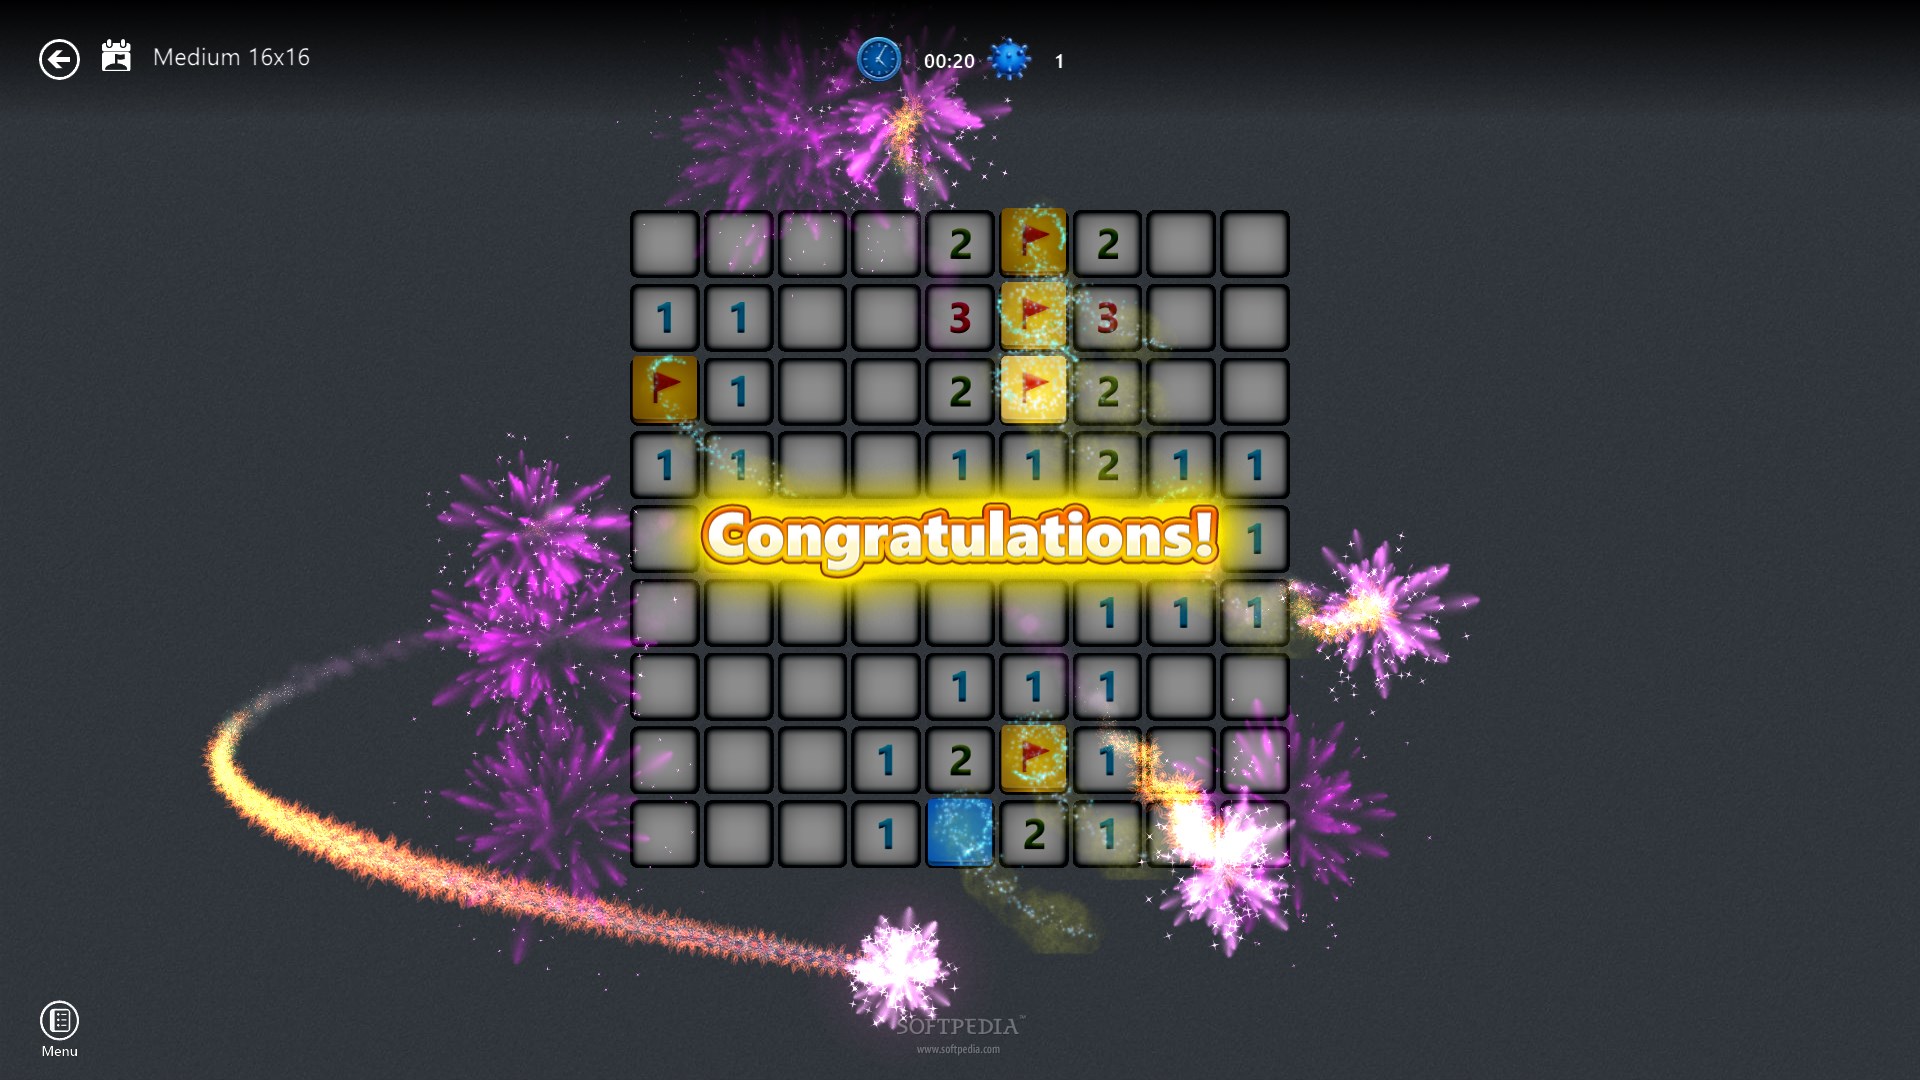 problems with microsoft minesweeper